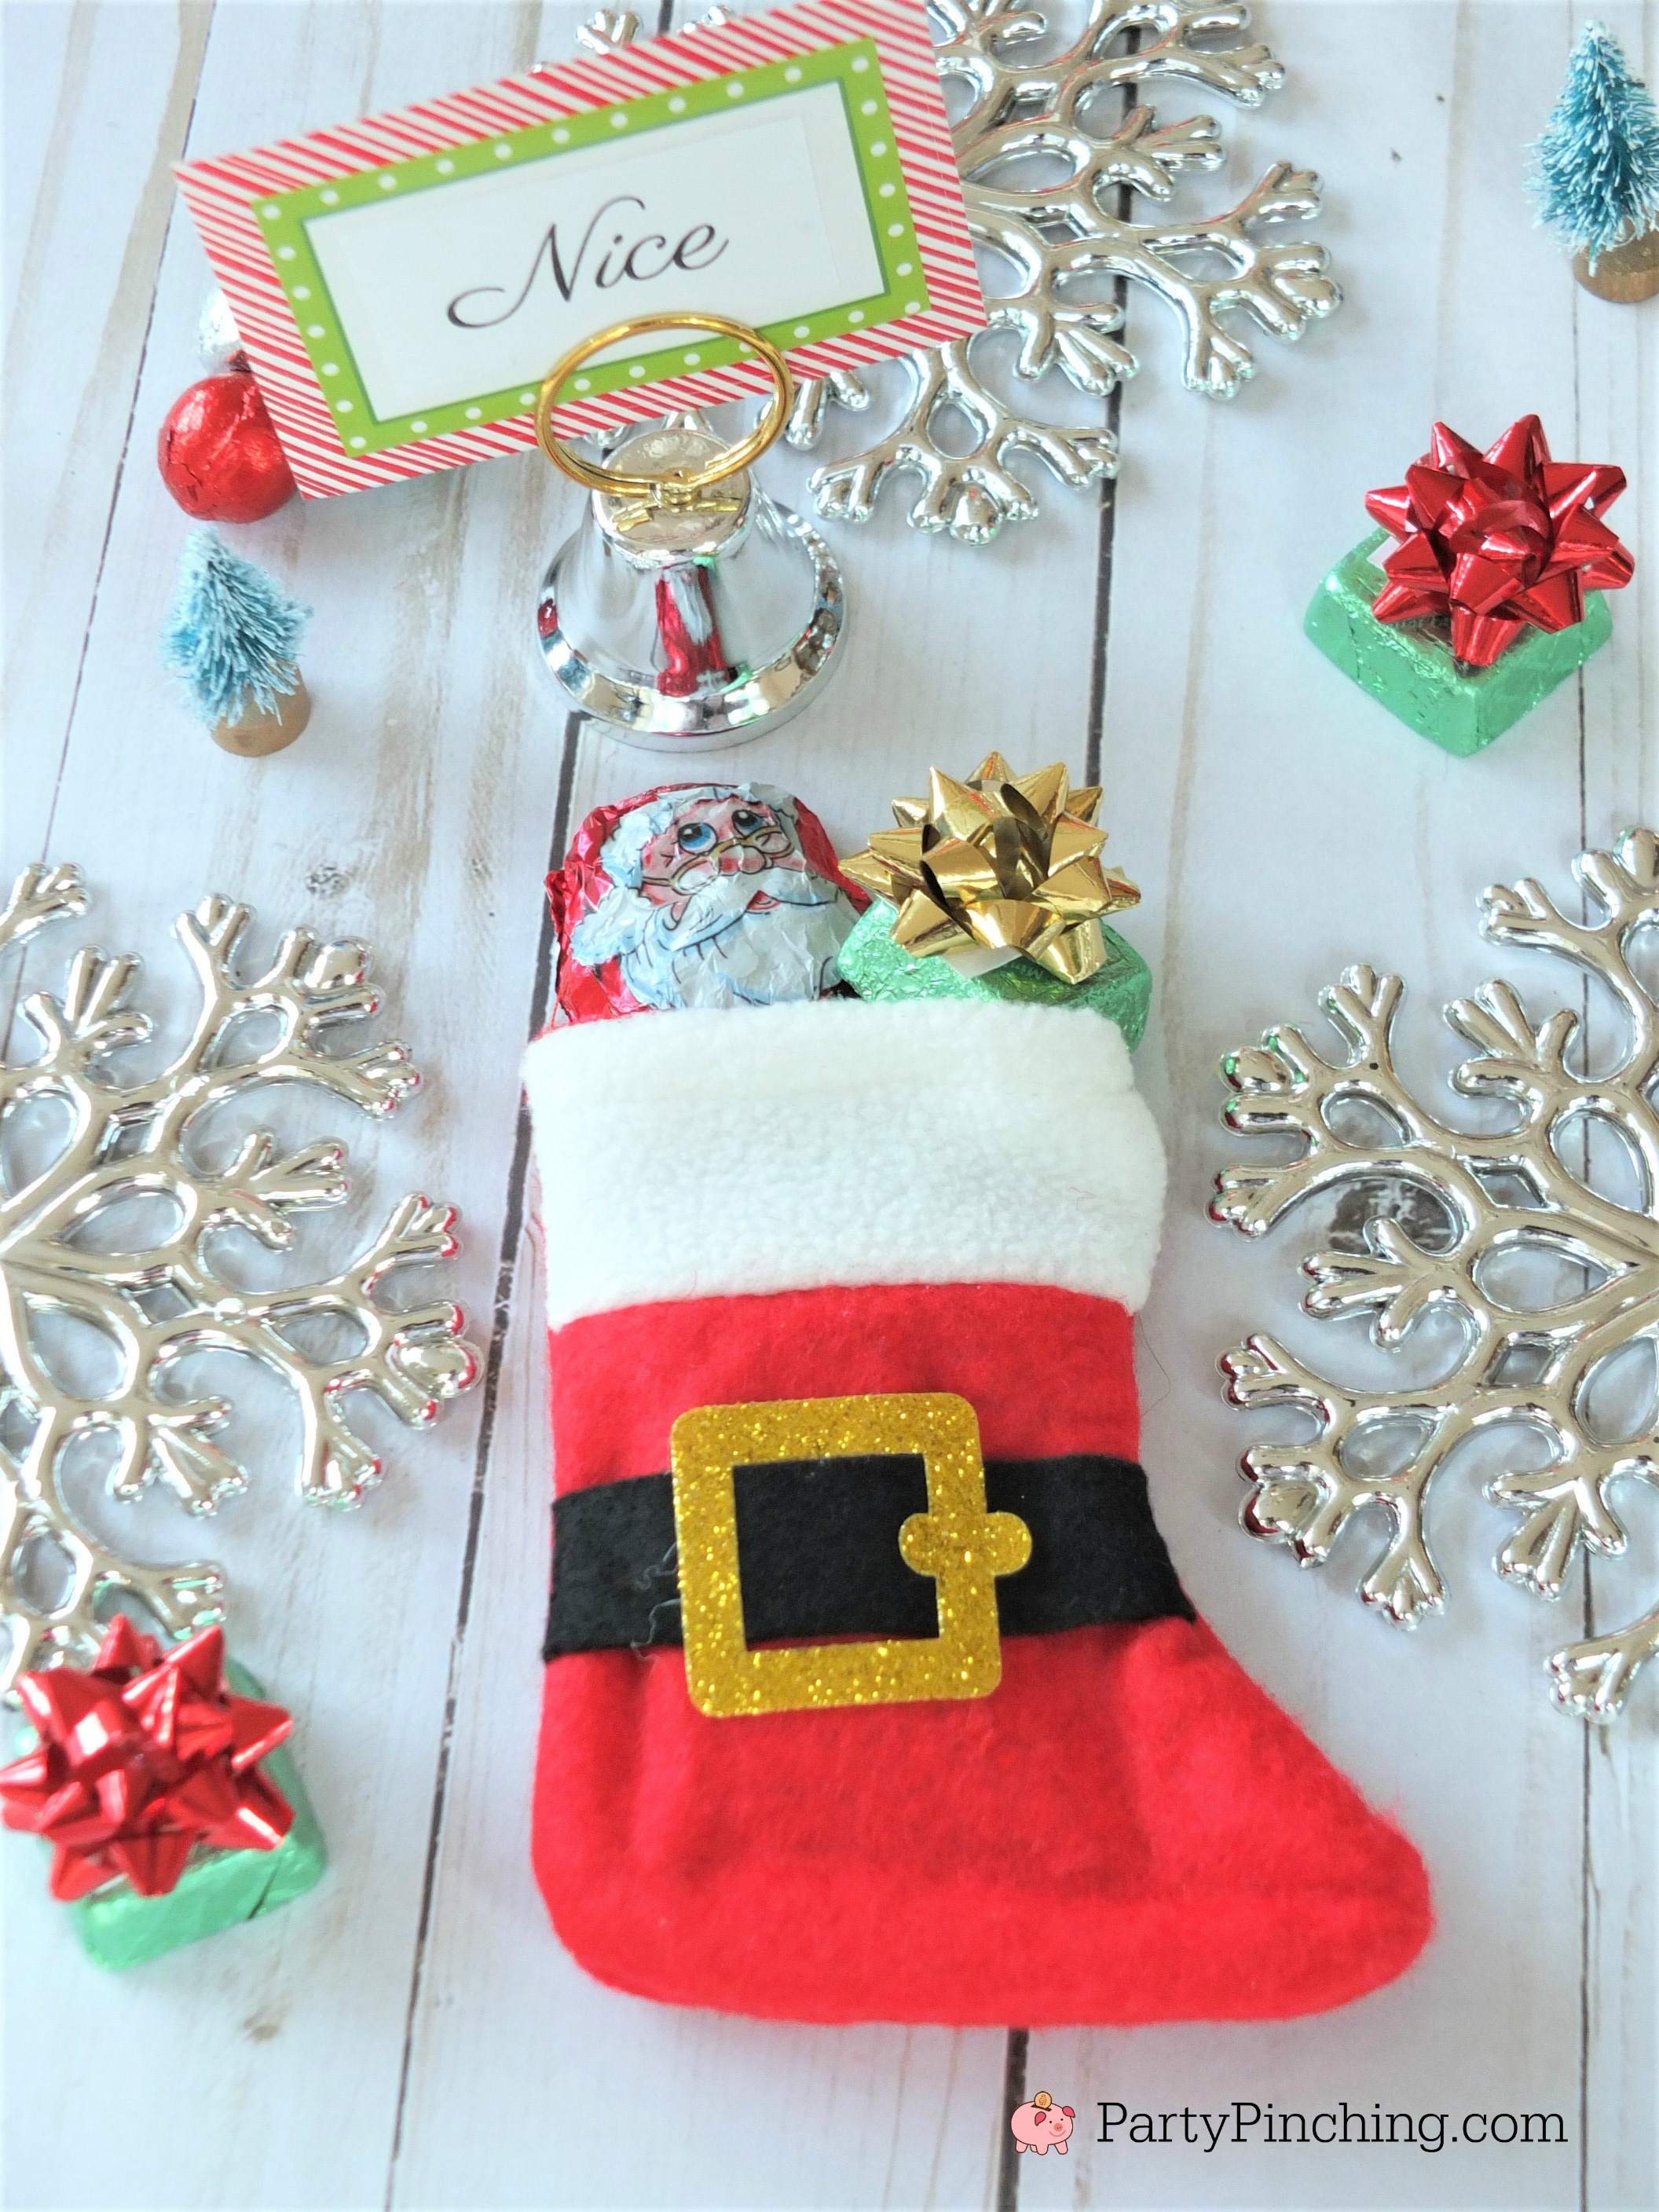 naughty and nice ideas for Christmas stockings, Christmas table setting ideas, cute Christmas dinner table ideas for the kids and family, lumps of coal candy, cute stocking stuffer ideas